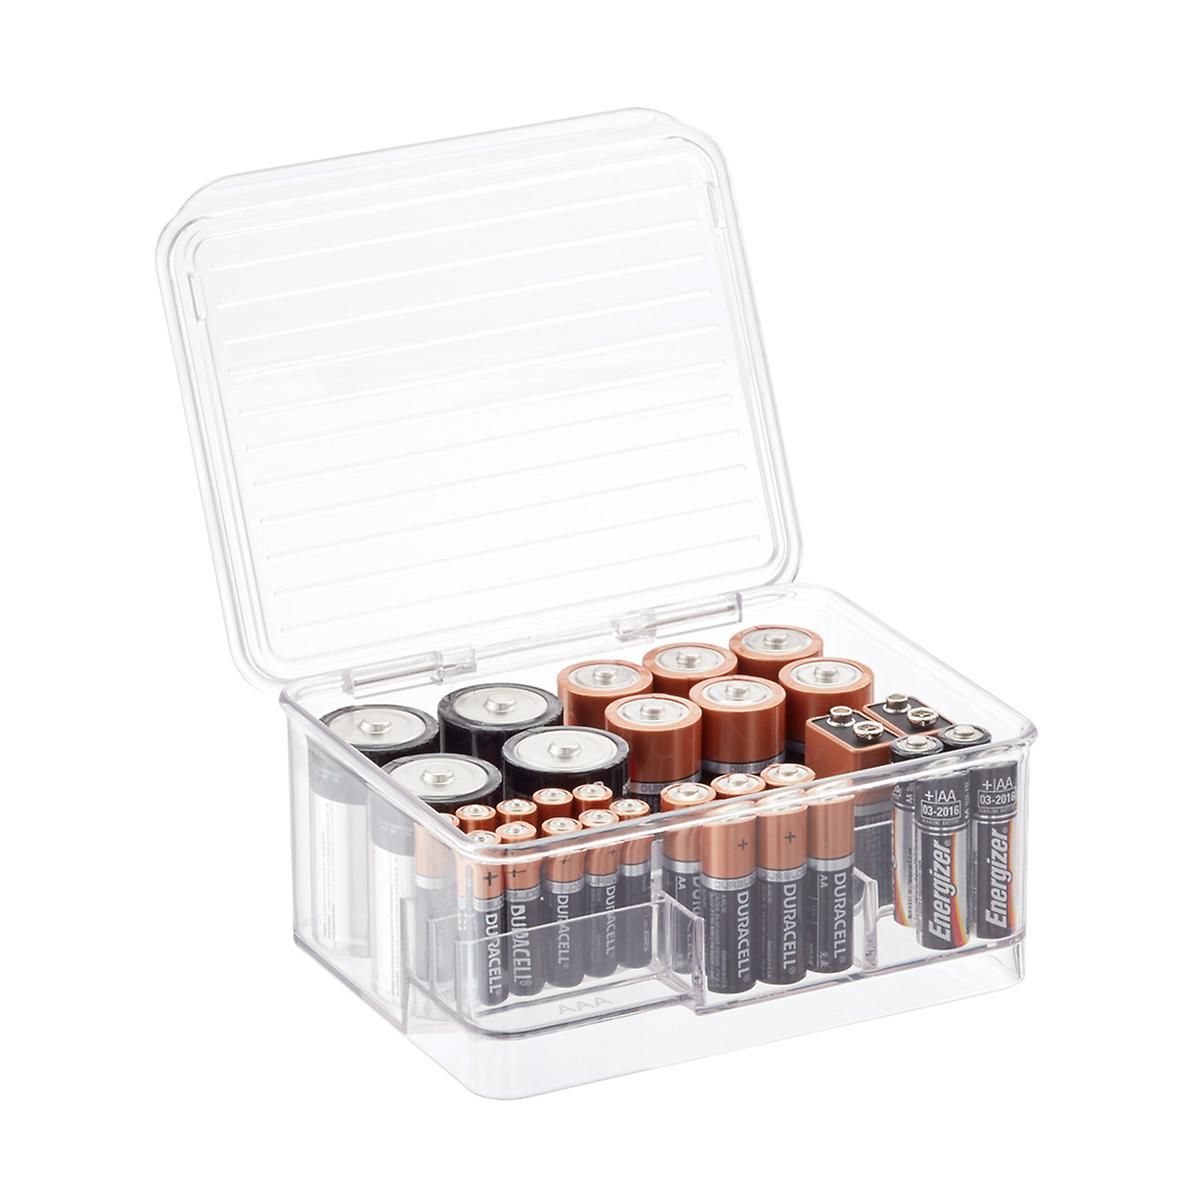 iDesign Linus Battery Organizer | The Container Store